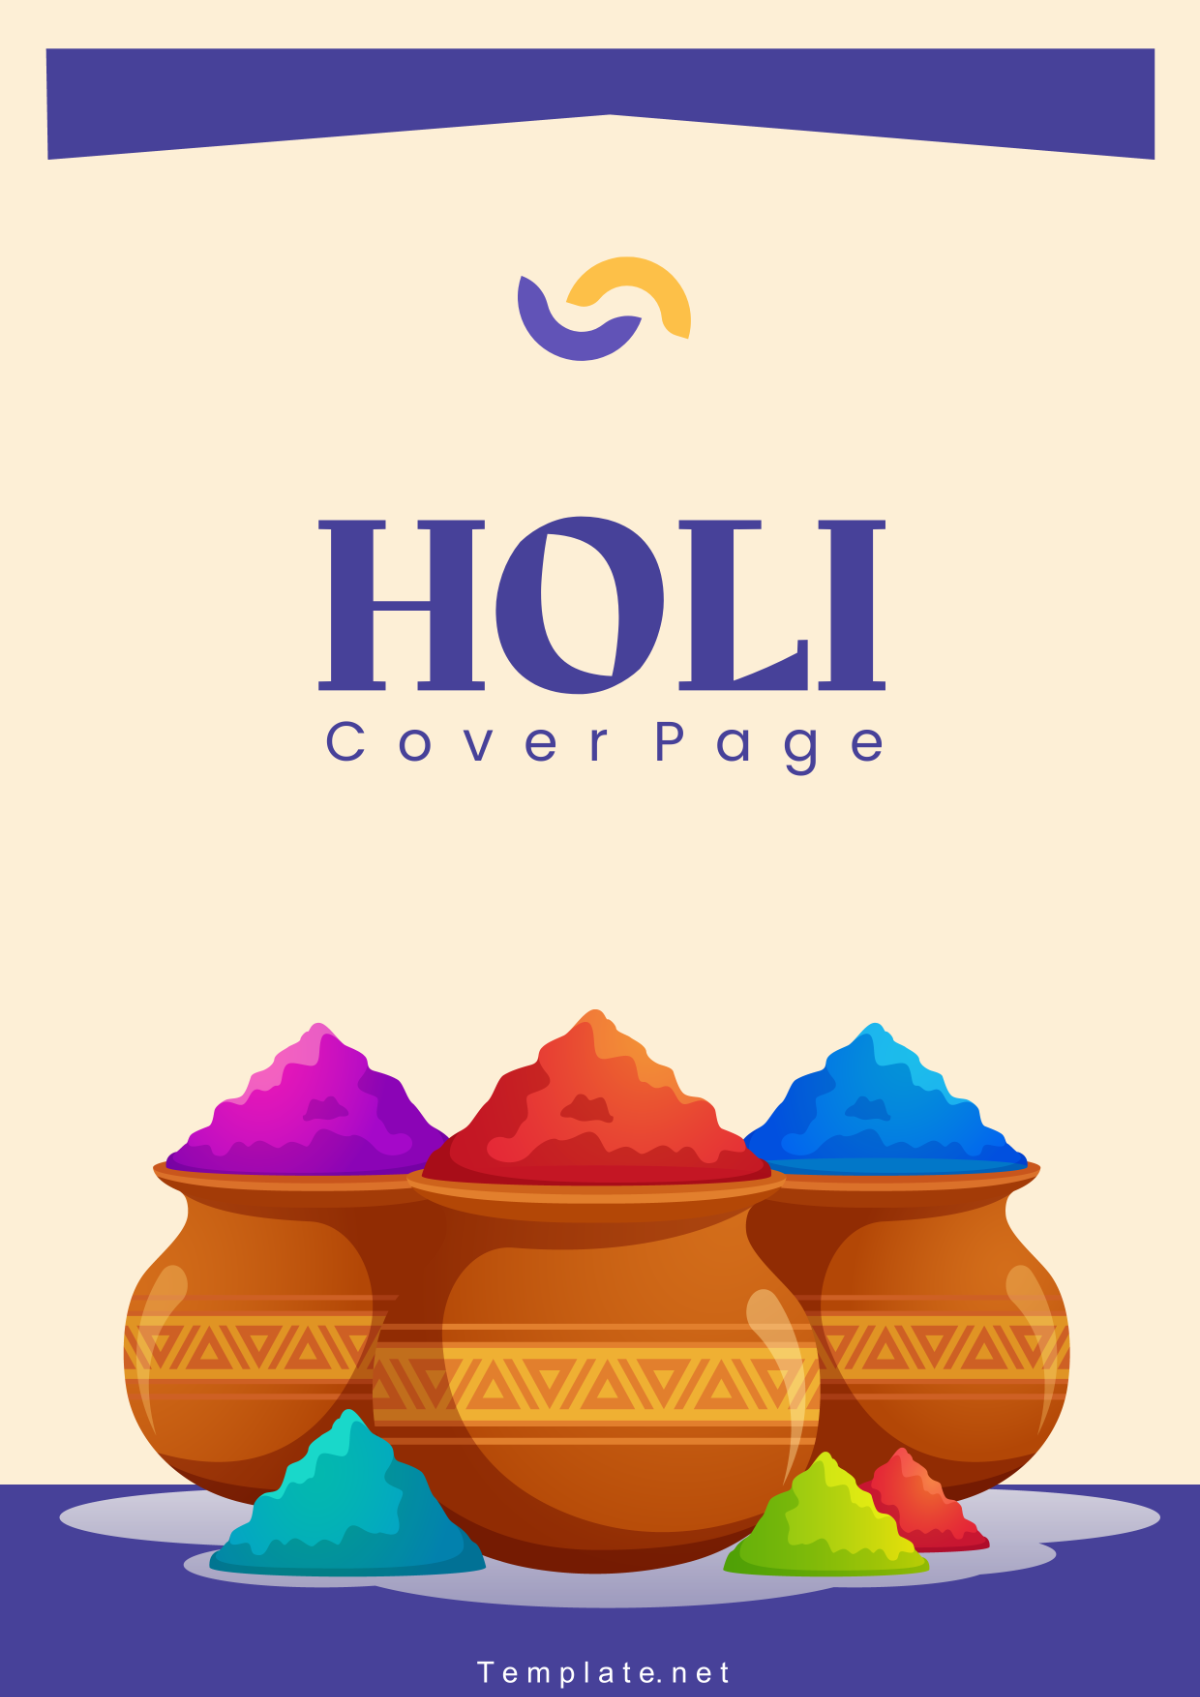 Holi Cover Page